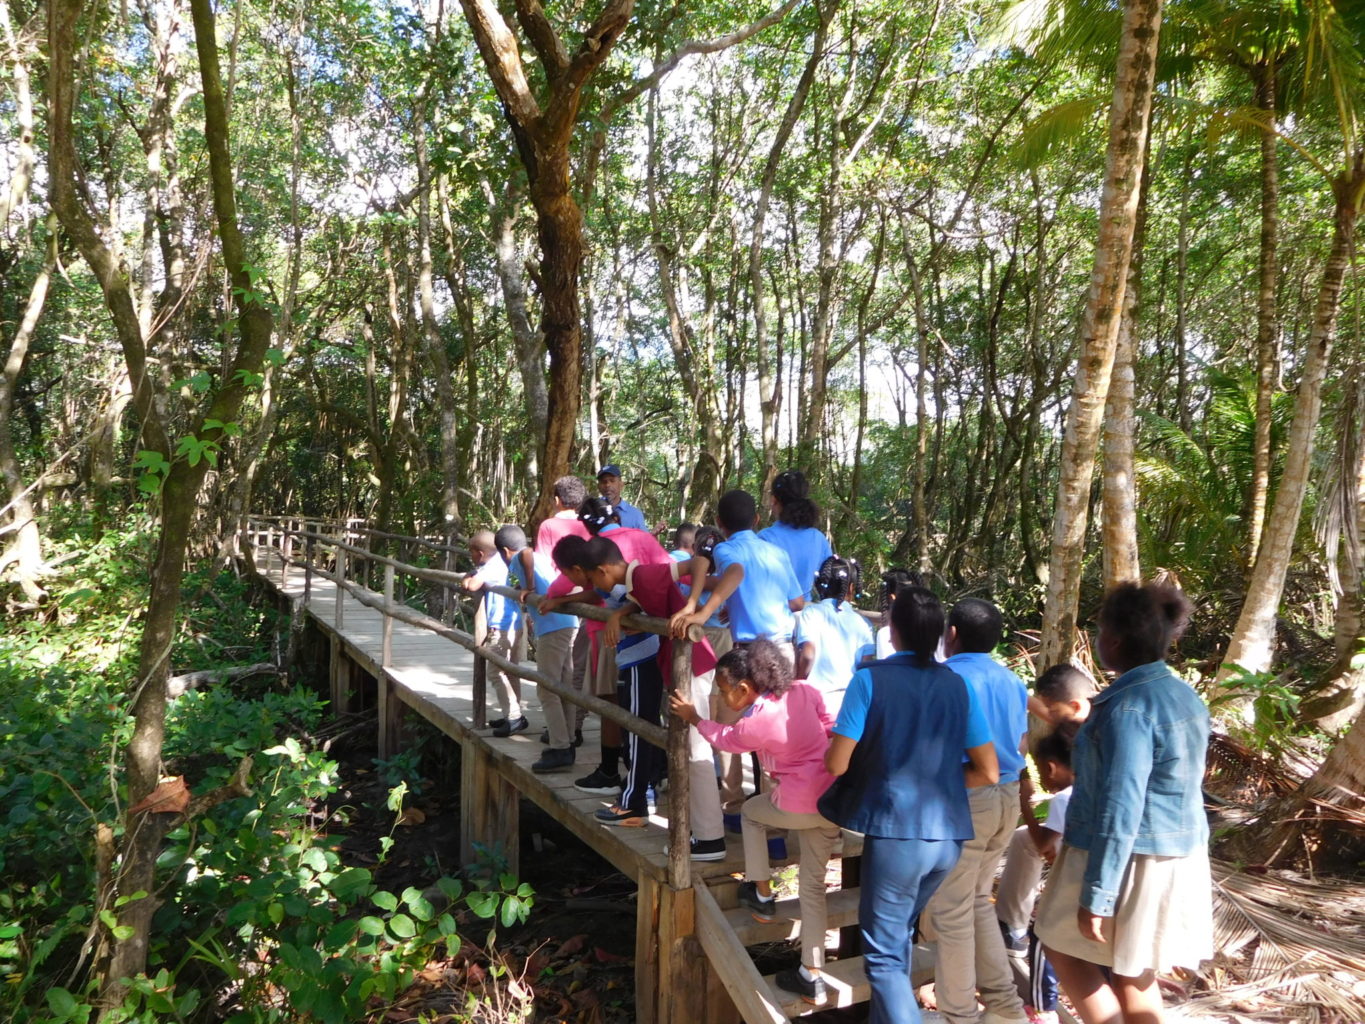 A group of youths tours the mangrove boardwalk at Las Garitas, Dominican Republic